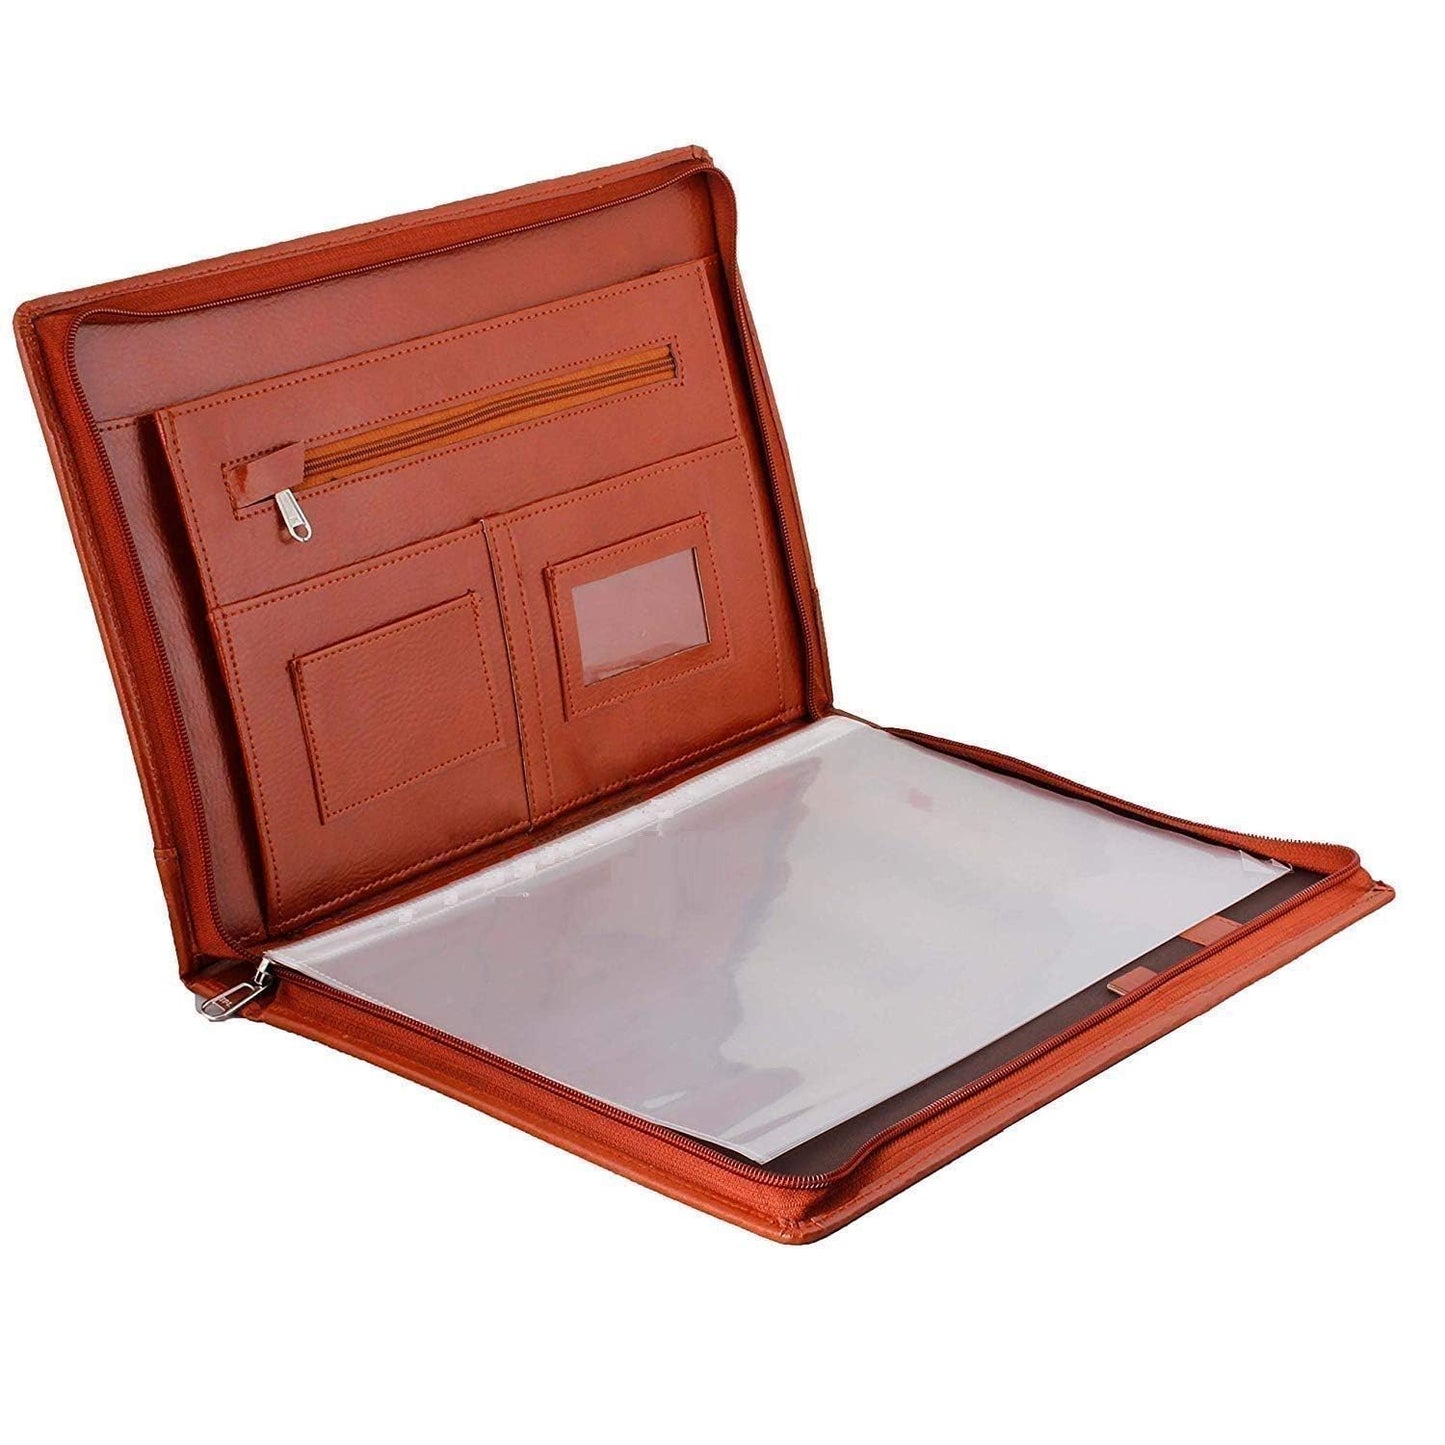 EYUVAA Professional Executive Waterproof Leather Certificate and Documents Organizer File with Pockets, Zip Closure and Card Holder -B4, 20 Leafs (Tan)